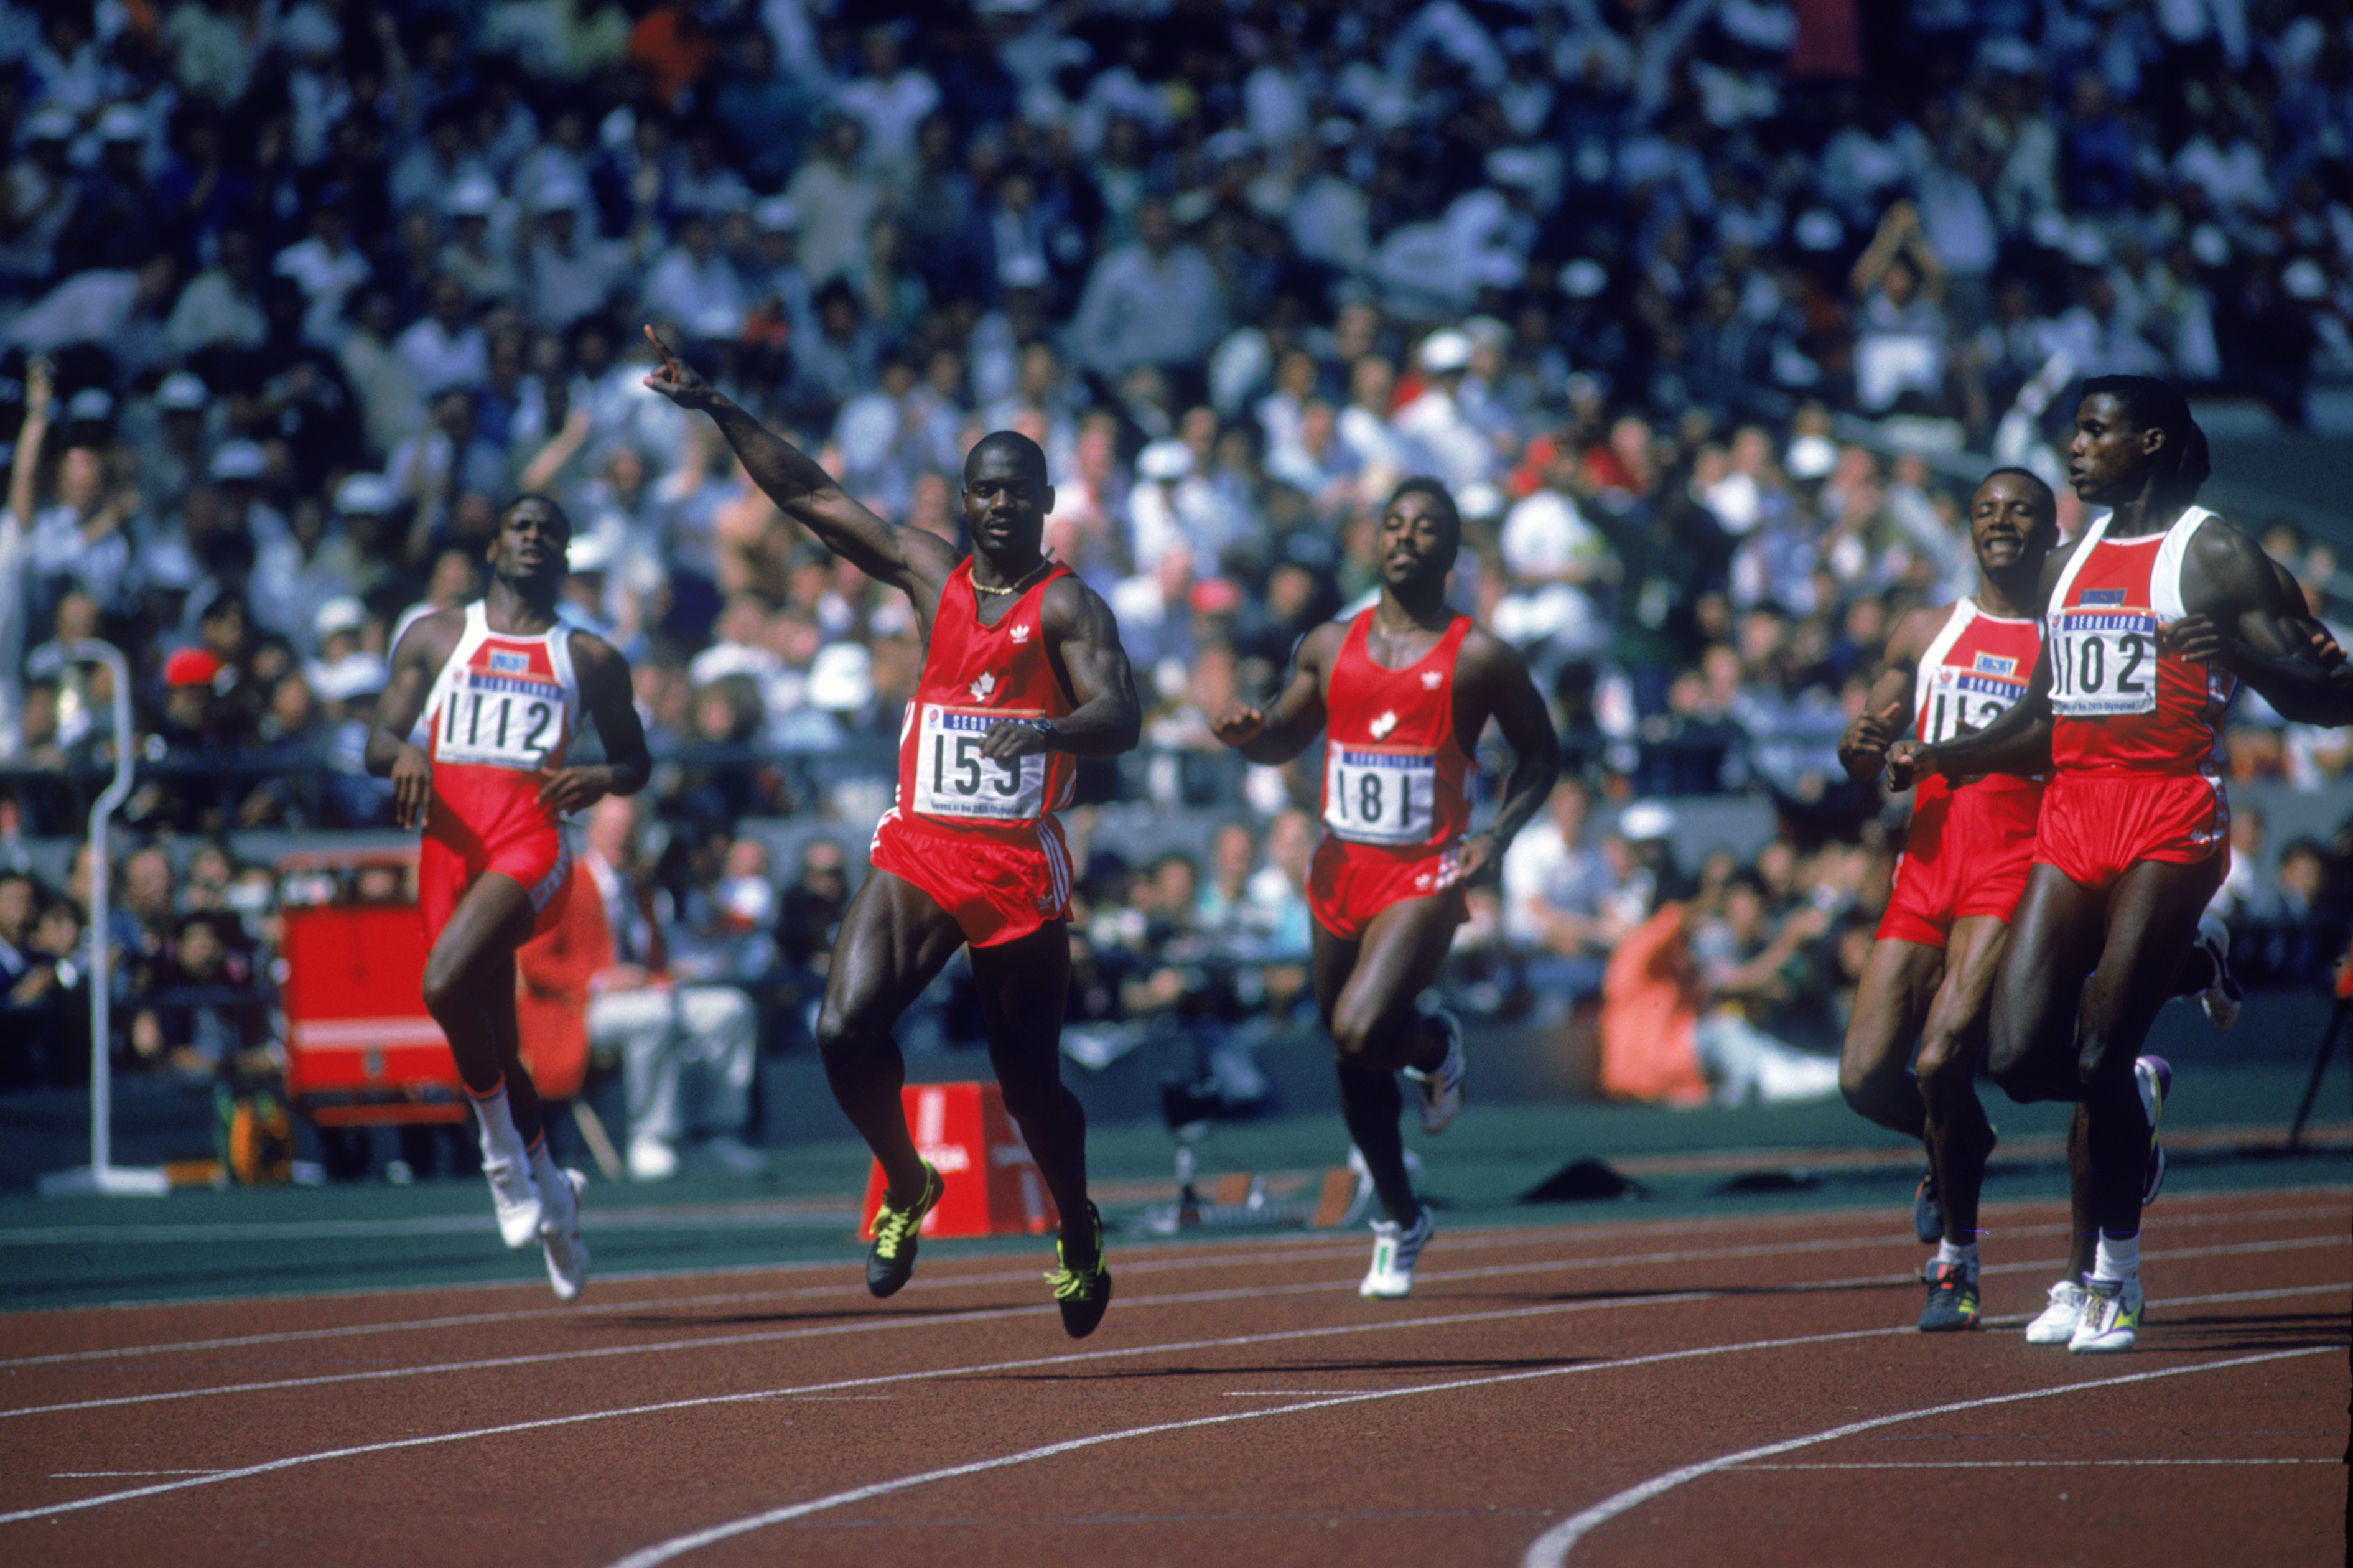 Canadian sprinter Ben Johnson (second from left) wins the final of the 100 Metres event at Seoul Olympic Stadium during the Olympic Games in Seoul, South Korea, 24th September 1988. Johnson won the event in a world record time of 9.79 seconds, but was dis